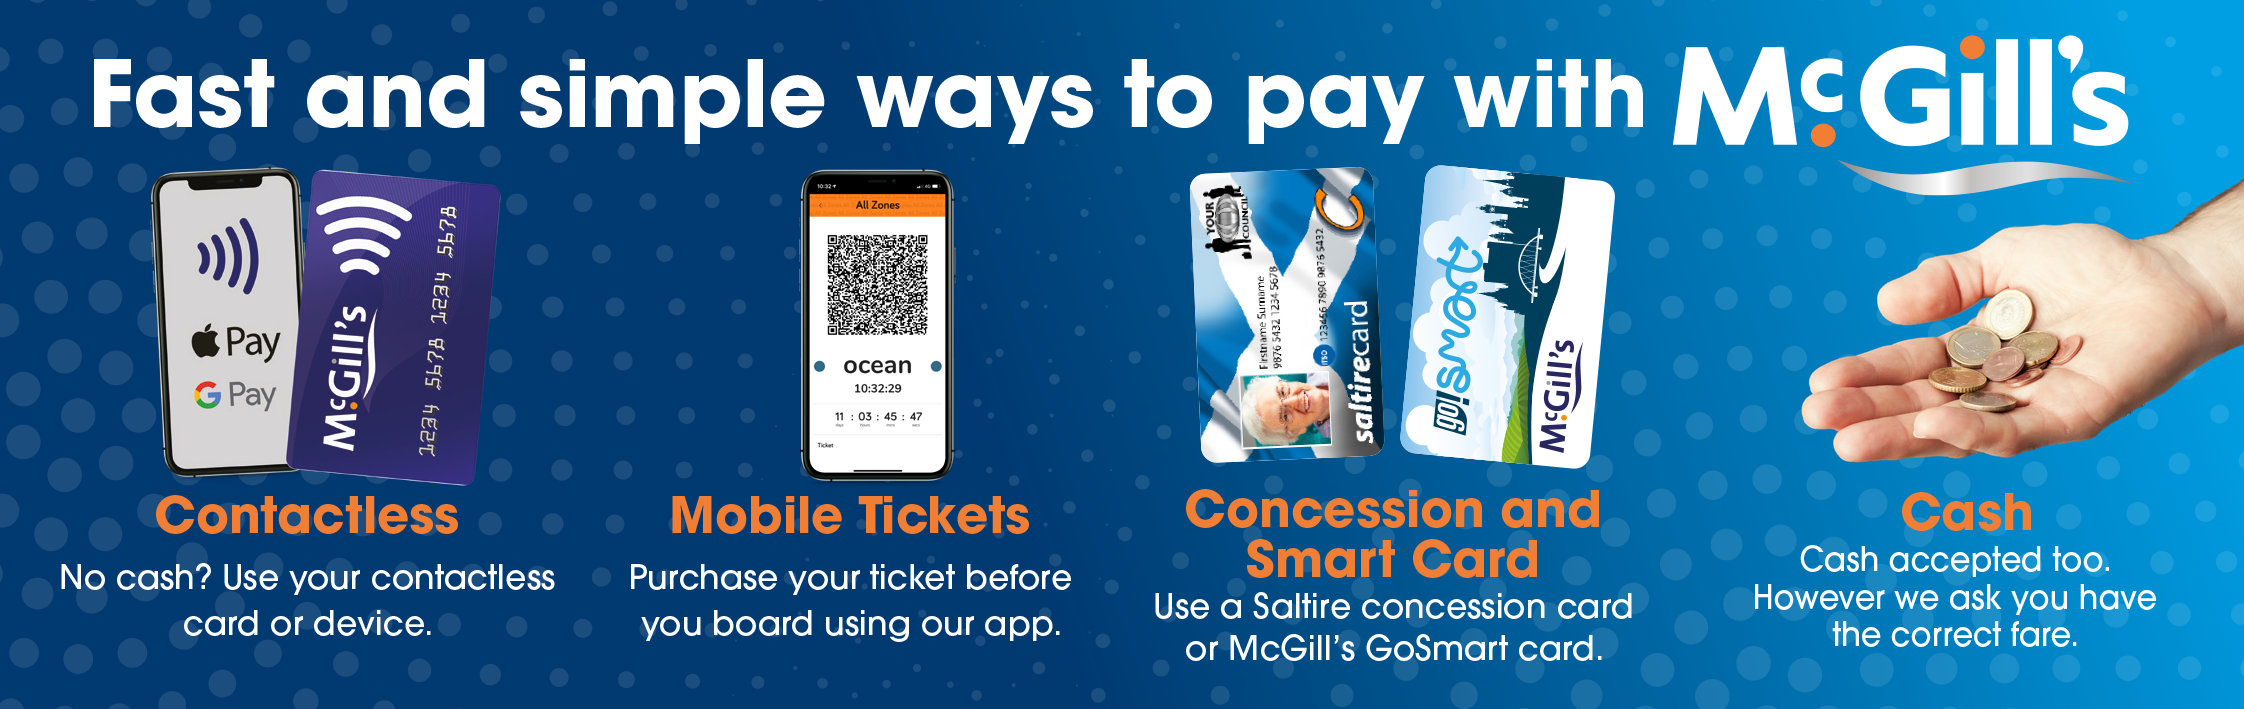 Fast and simple ways to pay with McGill's with details on contactless/mobile tickets, concession and smart cards and cash